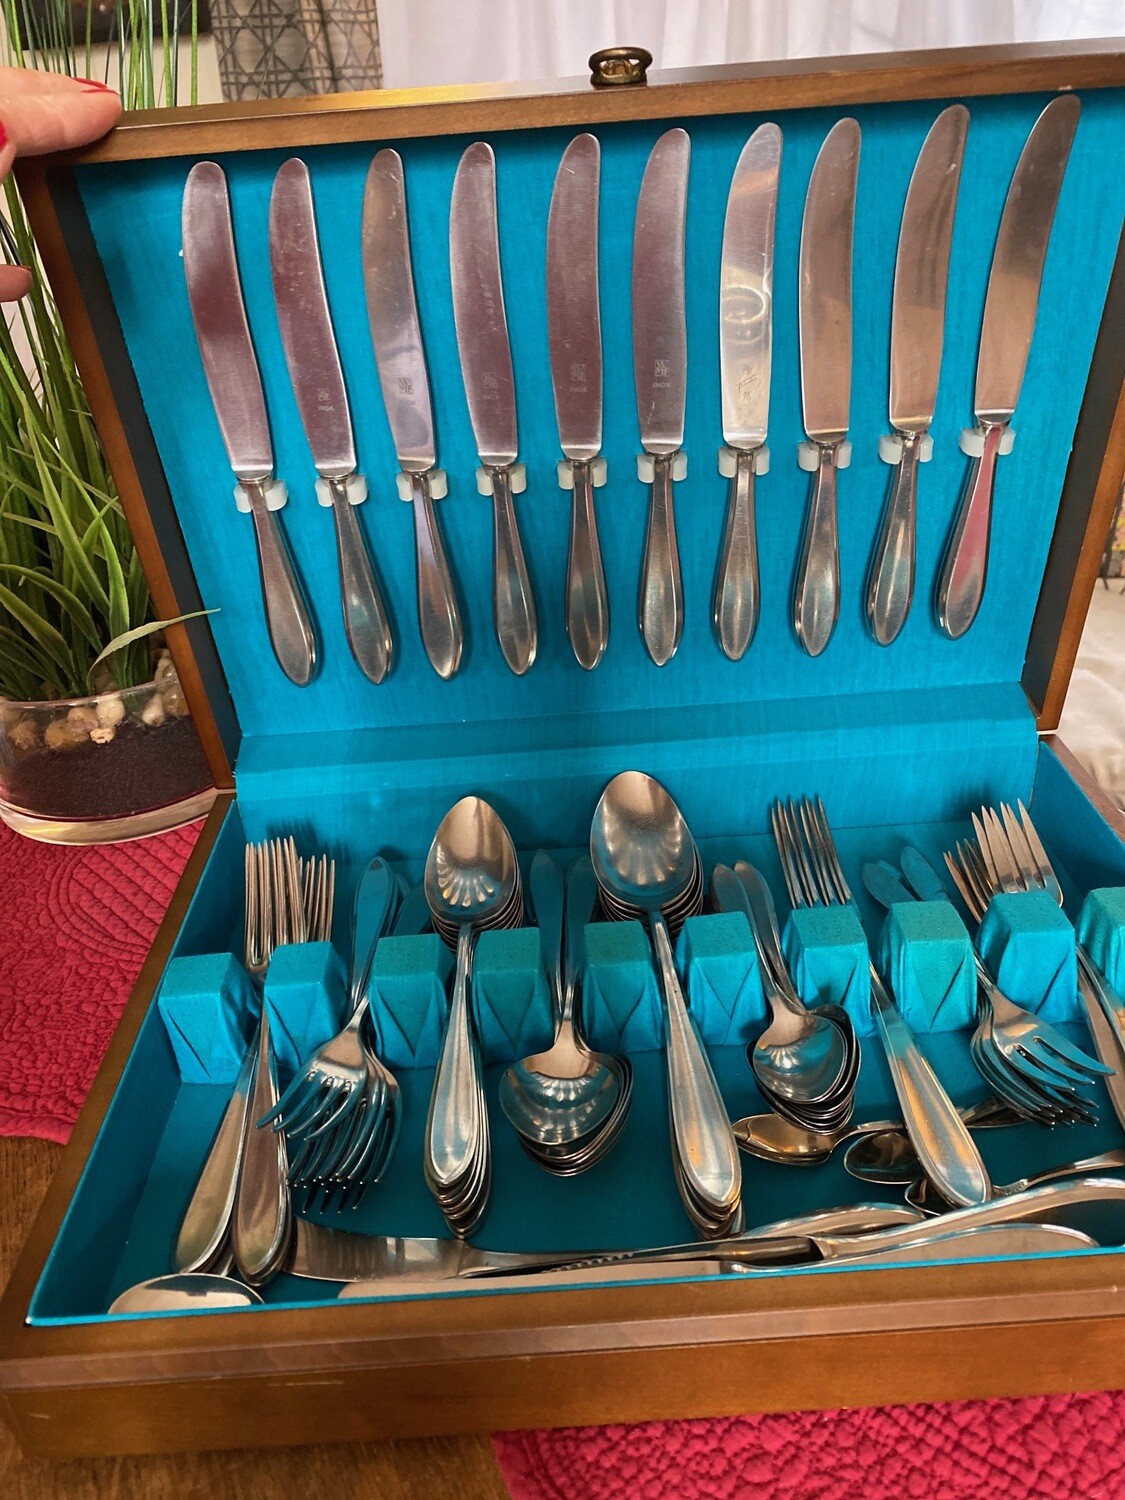 WMF Cromargan Germany Shadowpoint Line Flatware Silverware Set- 77 pieces. (RARE) With Case